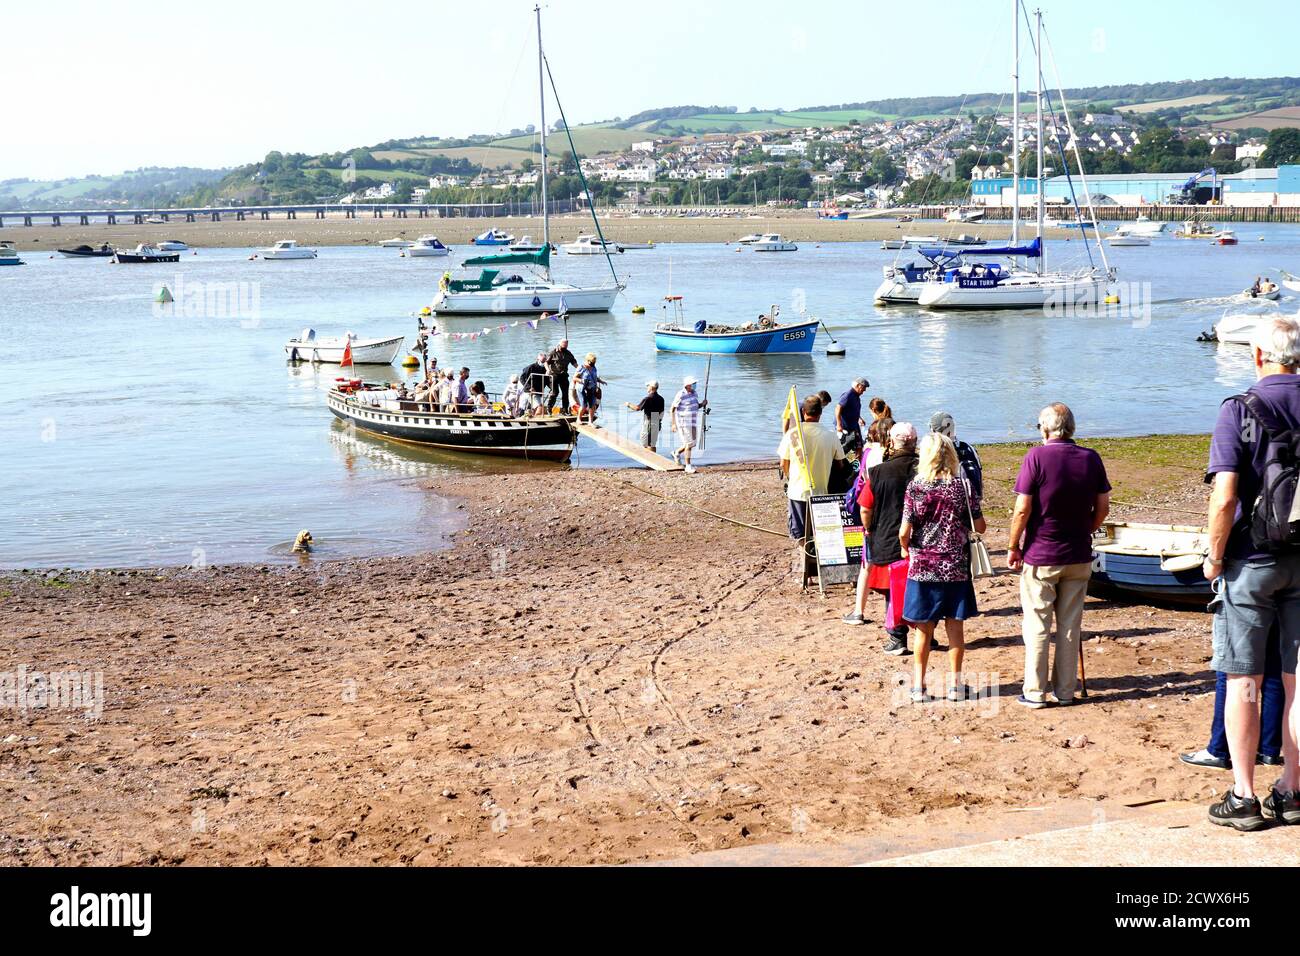 Teignmouth, Devon, UK. September 17, 2020. tourists and locals disembarking and queuing to embark the River Teign ferry to Shaldon at Teignmouth in De Stock Photo